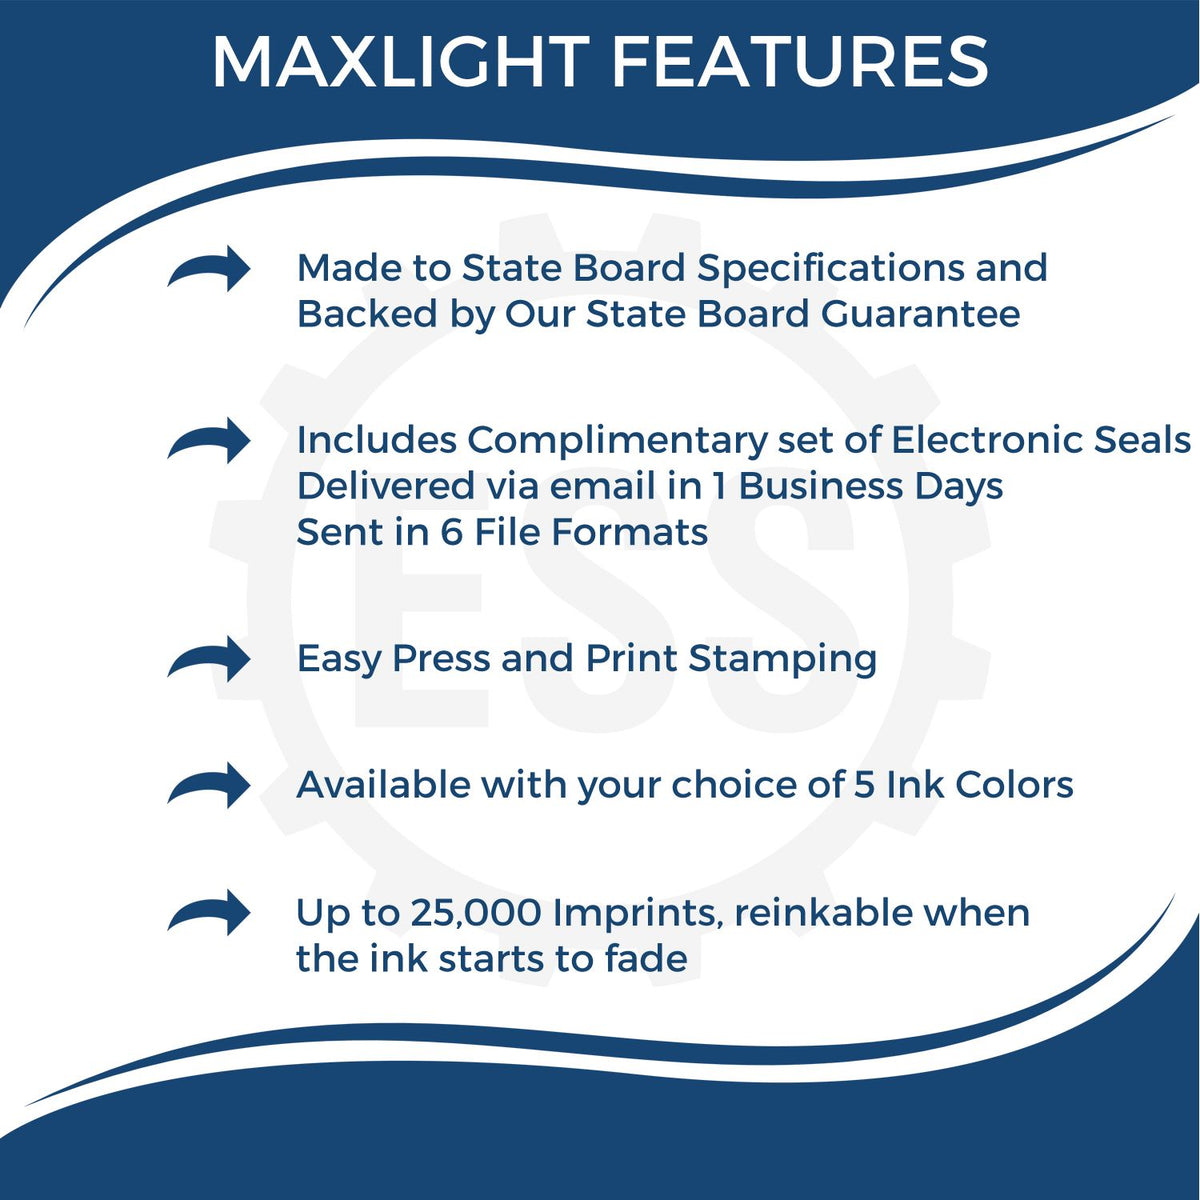 A picture of an infographic highlighting the selling points for the Premium MaxLight Pre-Inked Louisiana Geology Stamp